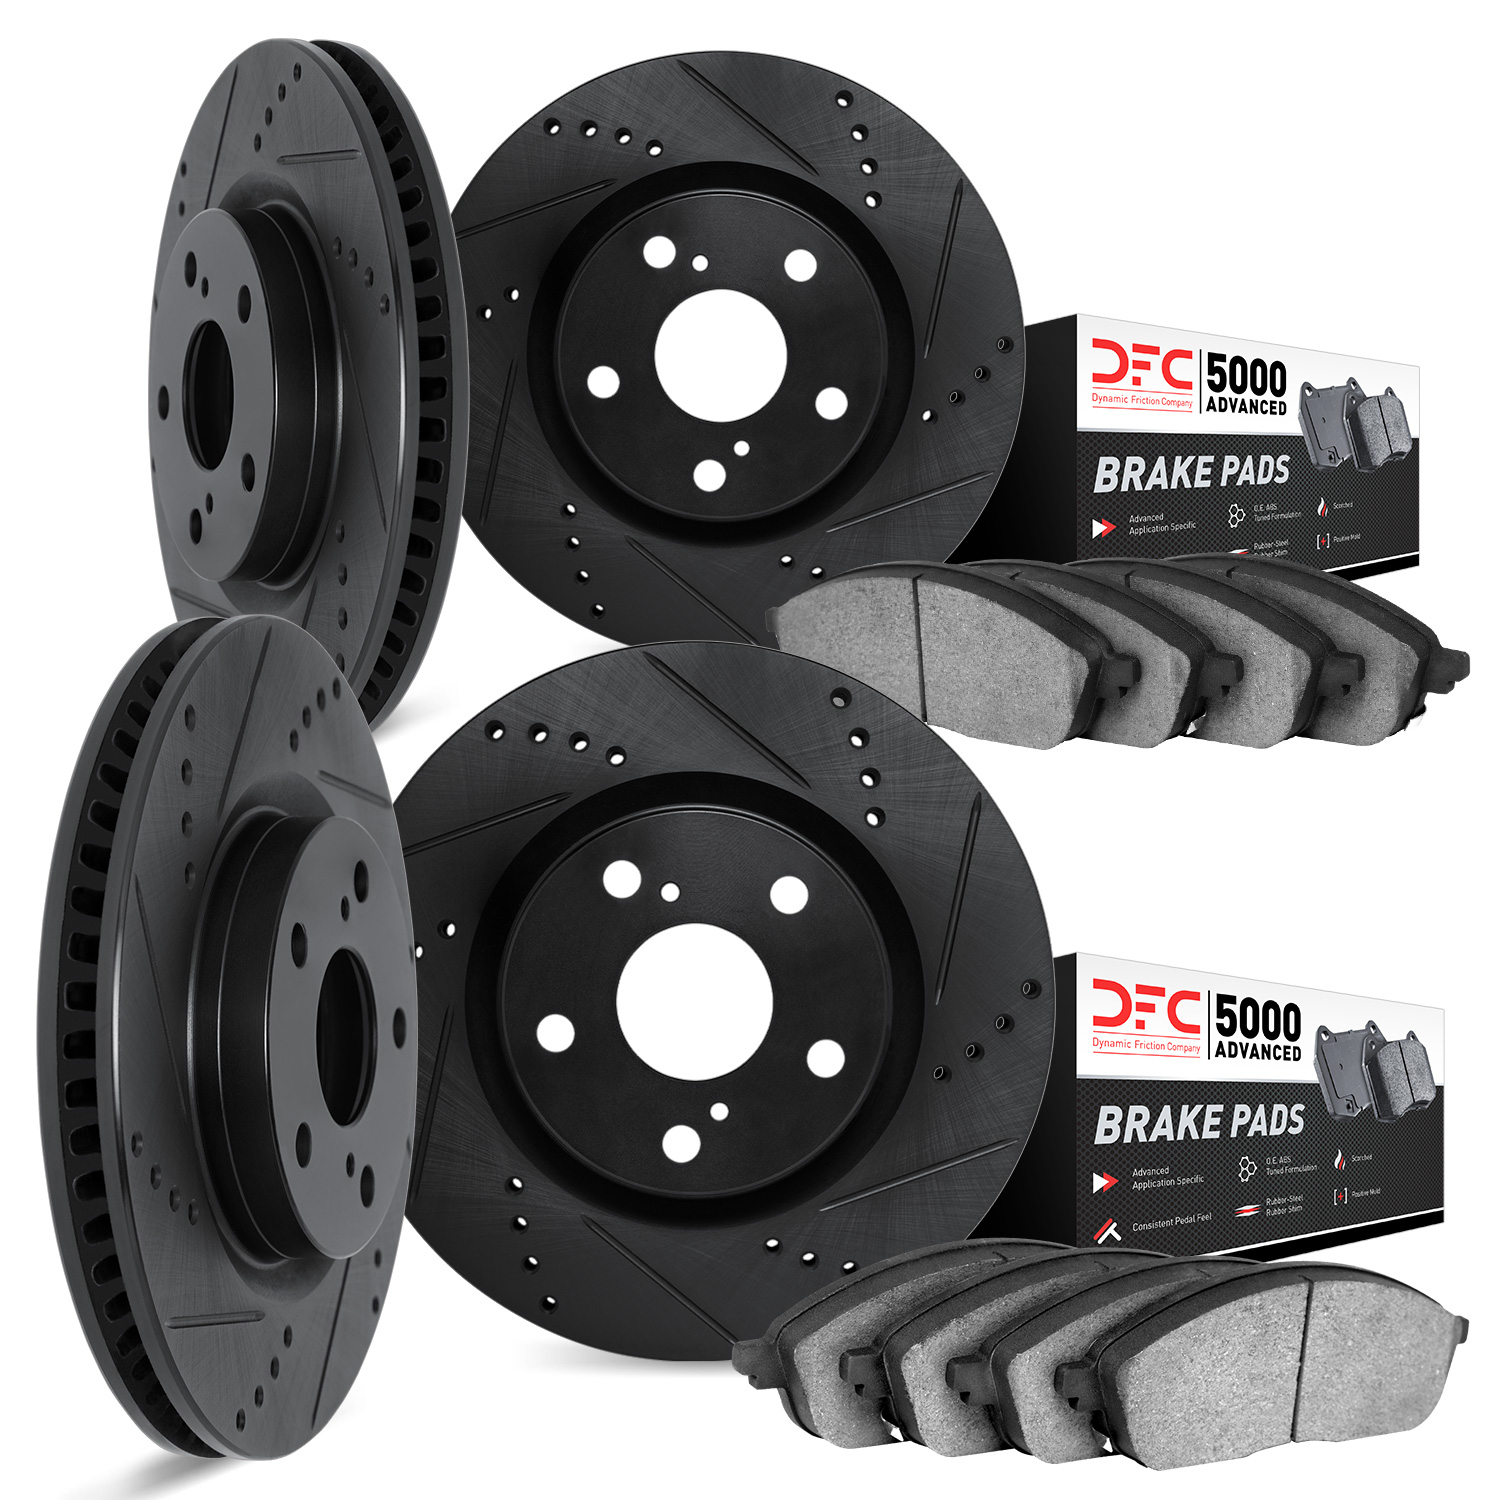 8504-46028 Drilled/Slotted Brake Rotors w/5000 Advanced Brake Pads Kit [Black], 2009-2015 GM, Position: Front and Rear